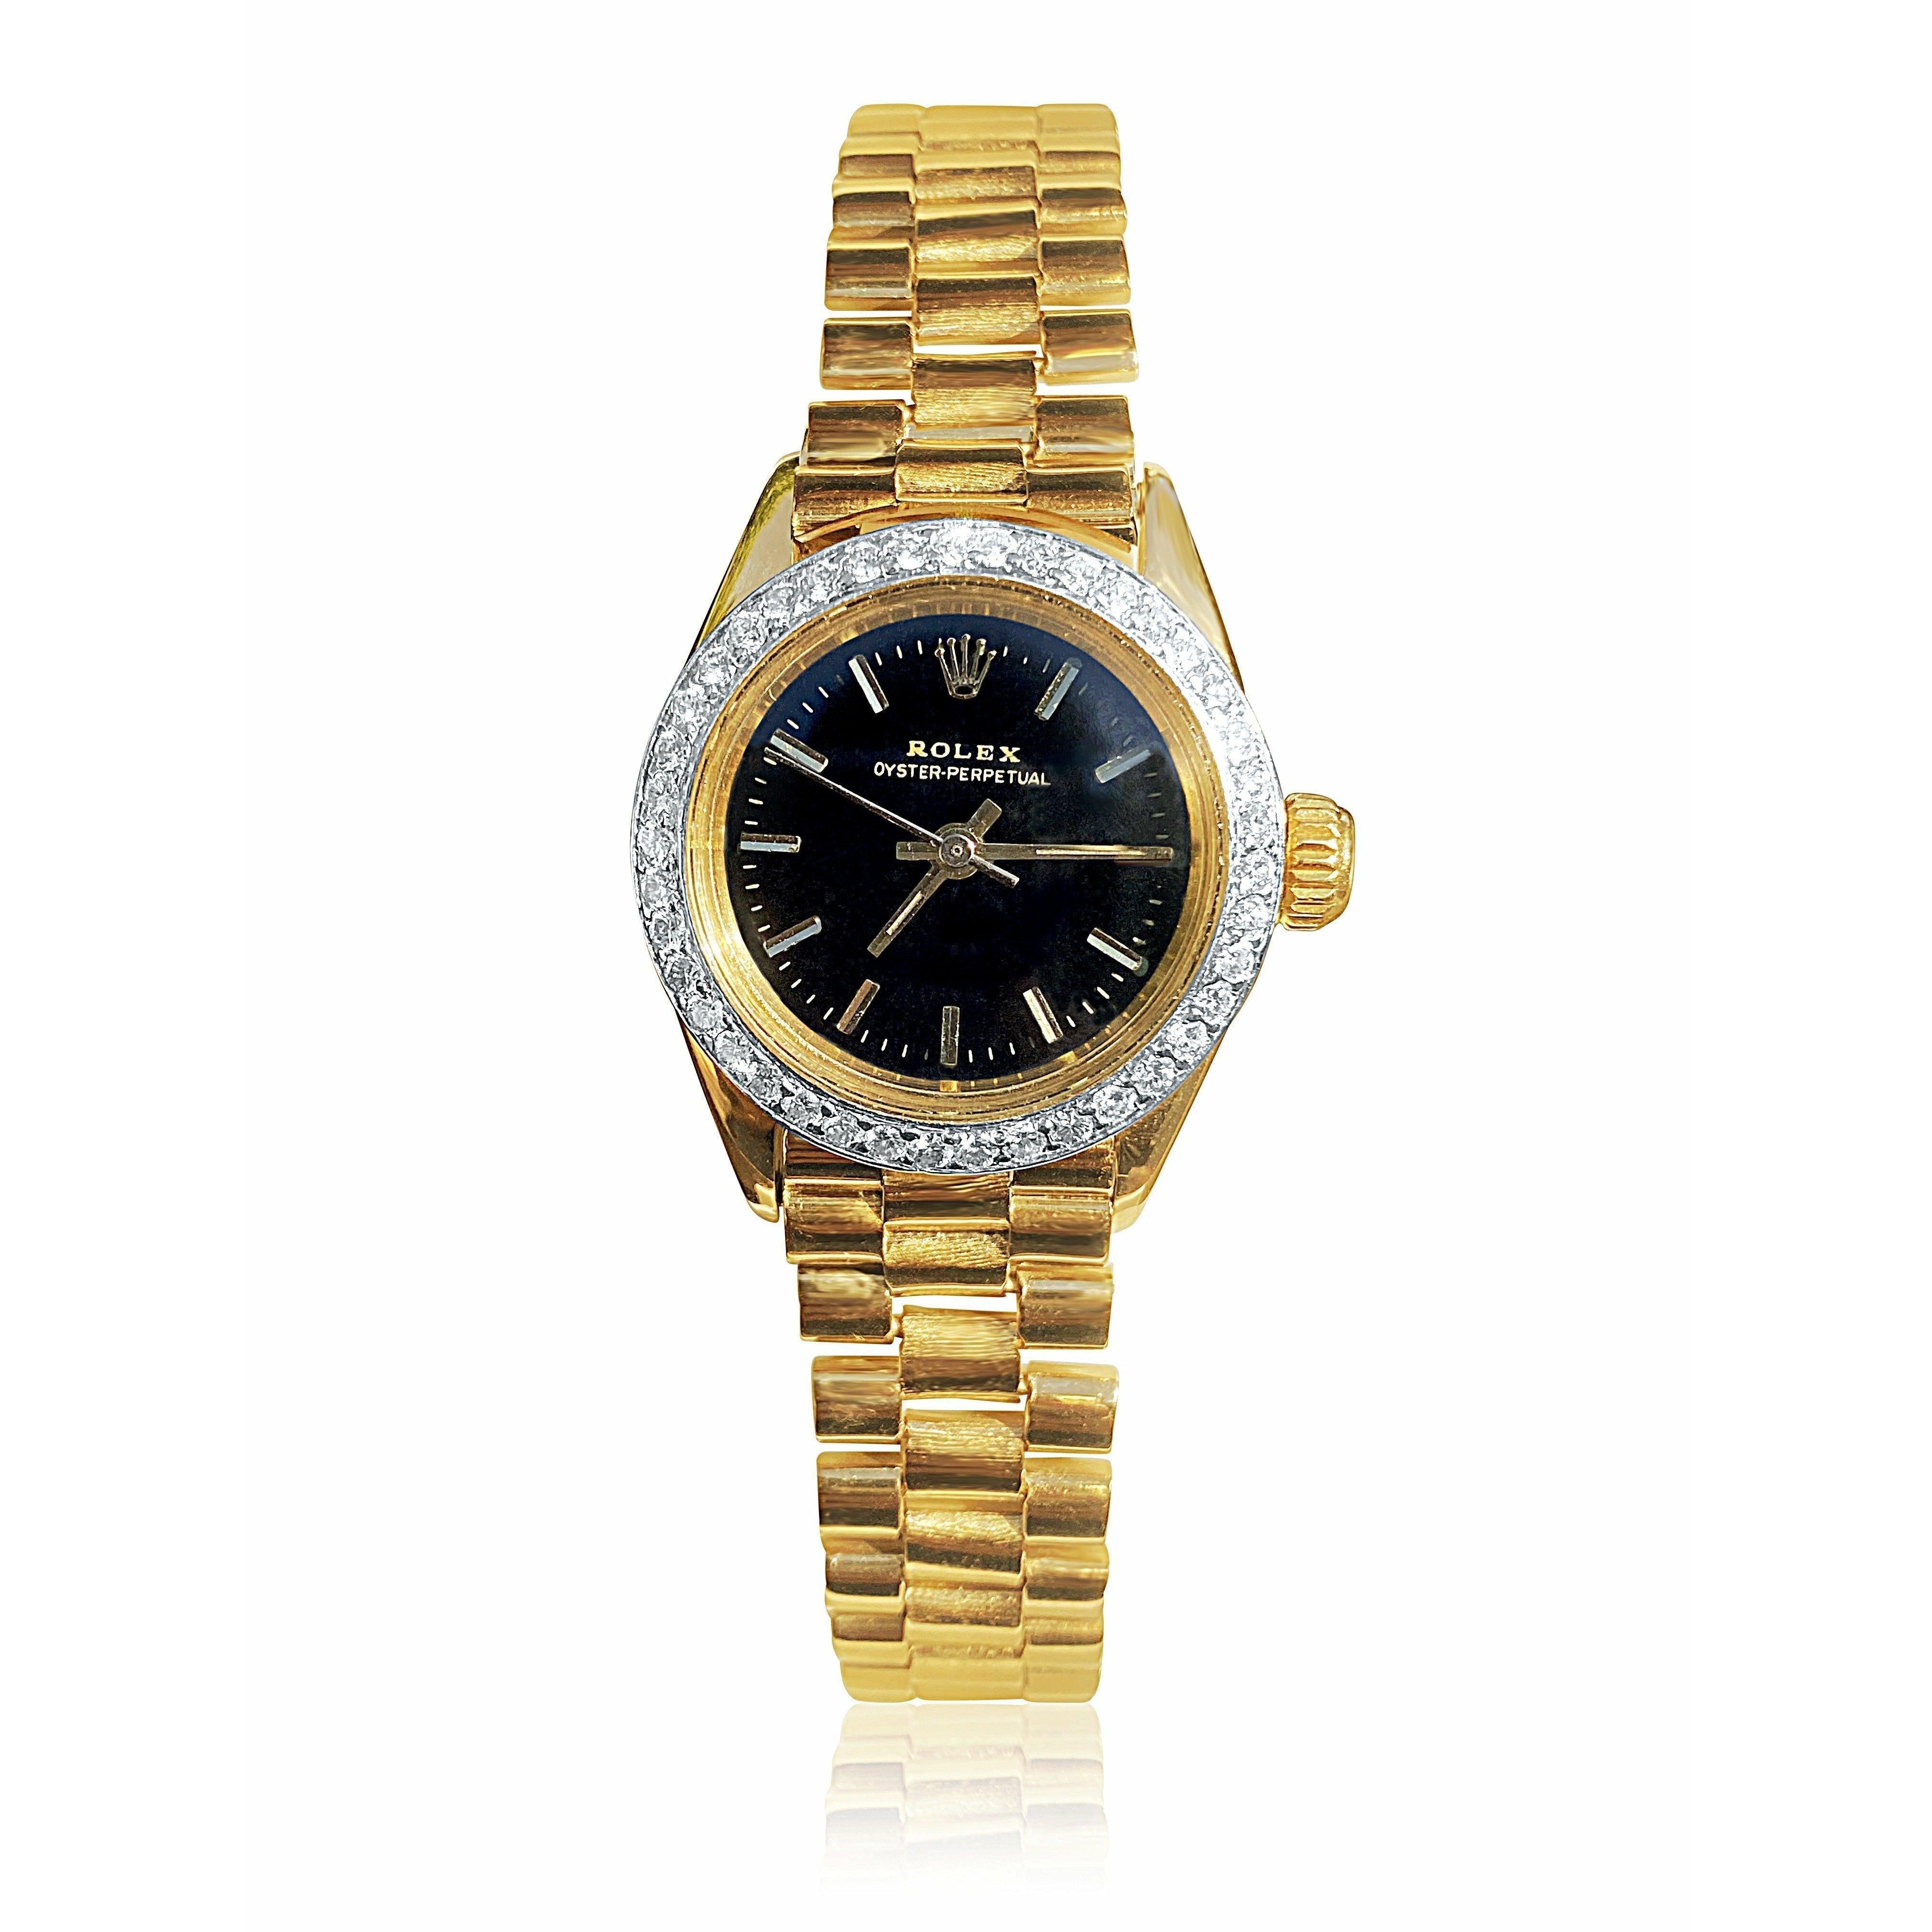 26mm Rolex Oyster Perpetual Black Face and Diamond Bezel Rolex in 18k Gold - ASSAY